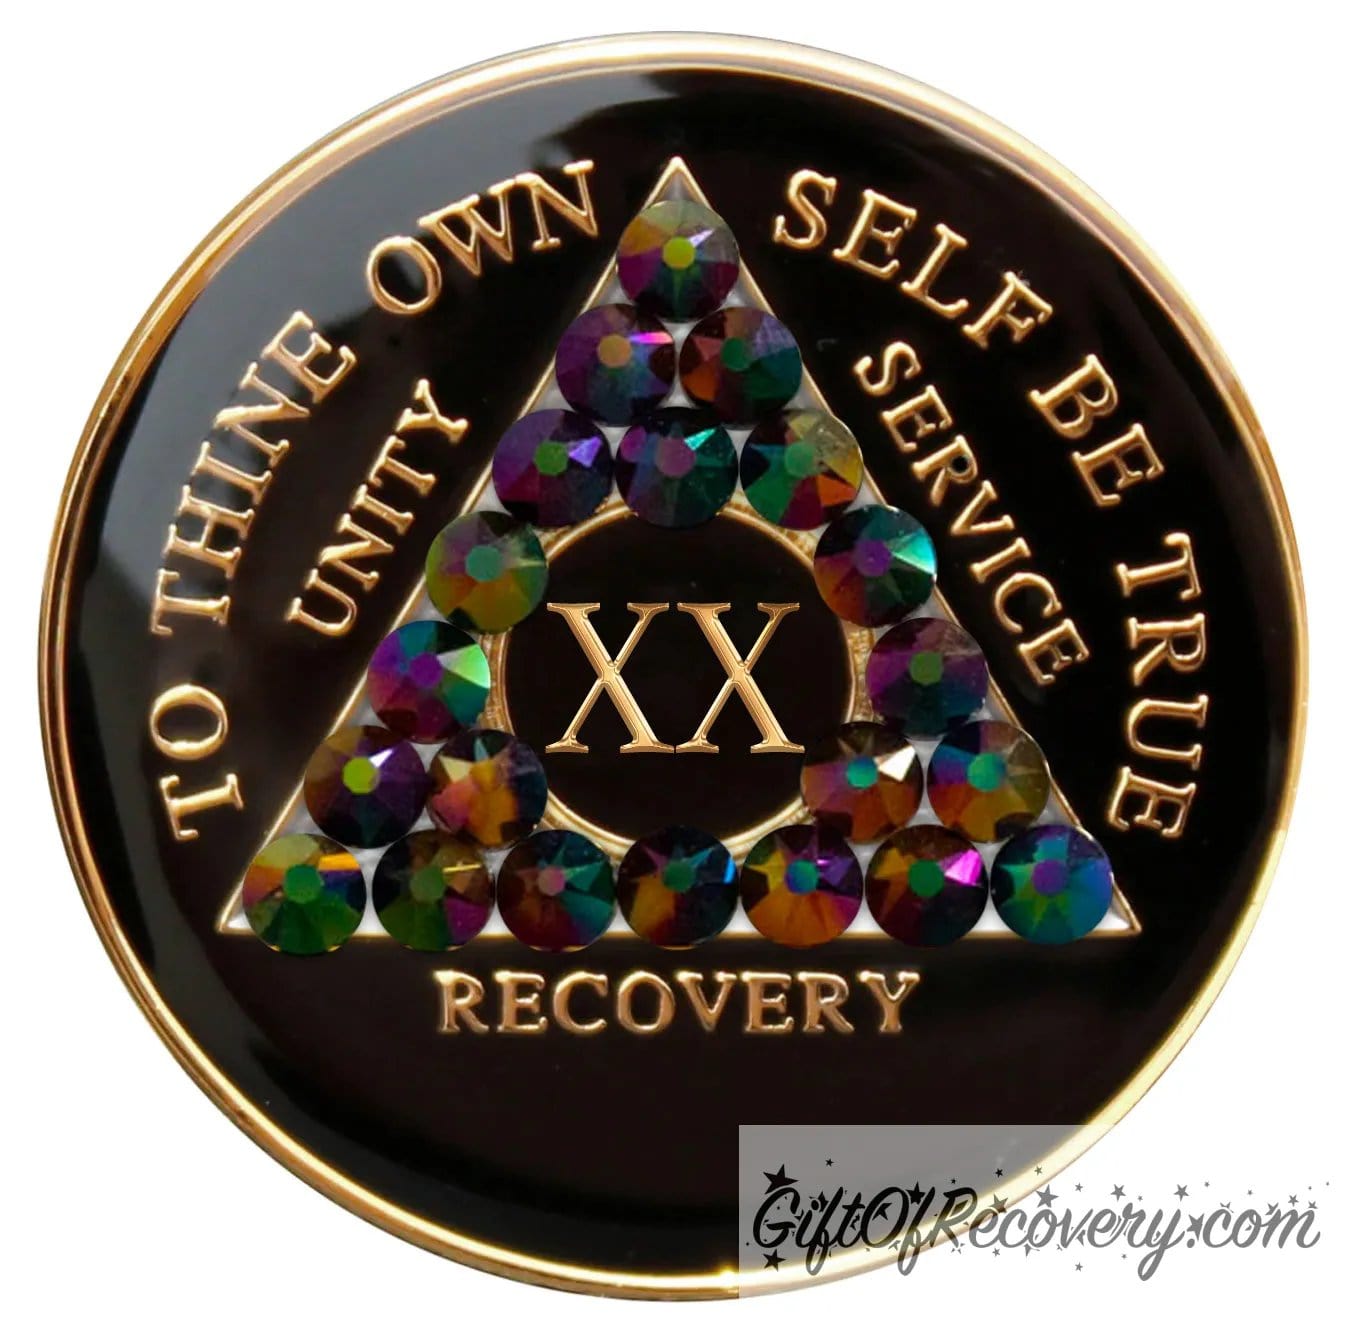 20 year black onyx AA recovery medallion, with 21 genuine peacock crystals, symbolizing the beauty and diversity of recovery journeys, the AA medallion has; to thine own self be true, unity, service, recovery, roman numeral, and the rim, embossed with 14k gold and sealed with resin for a glossy finish.